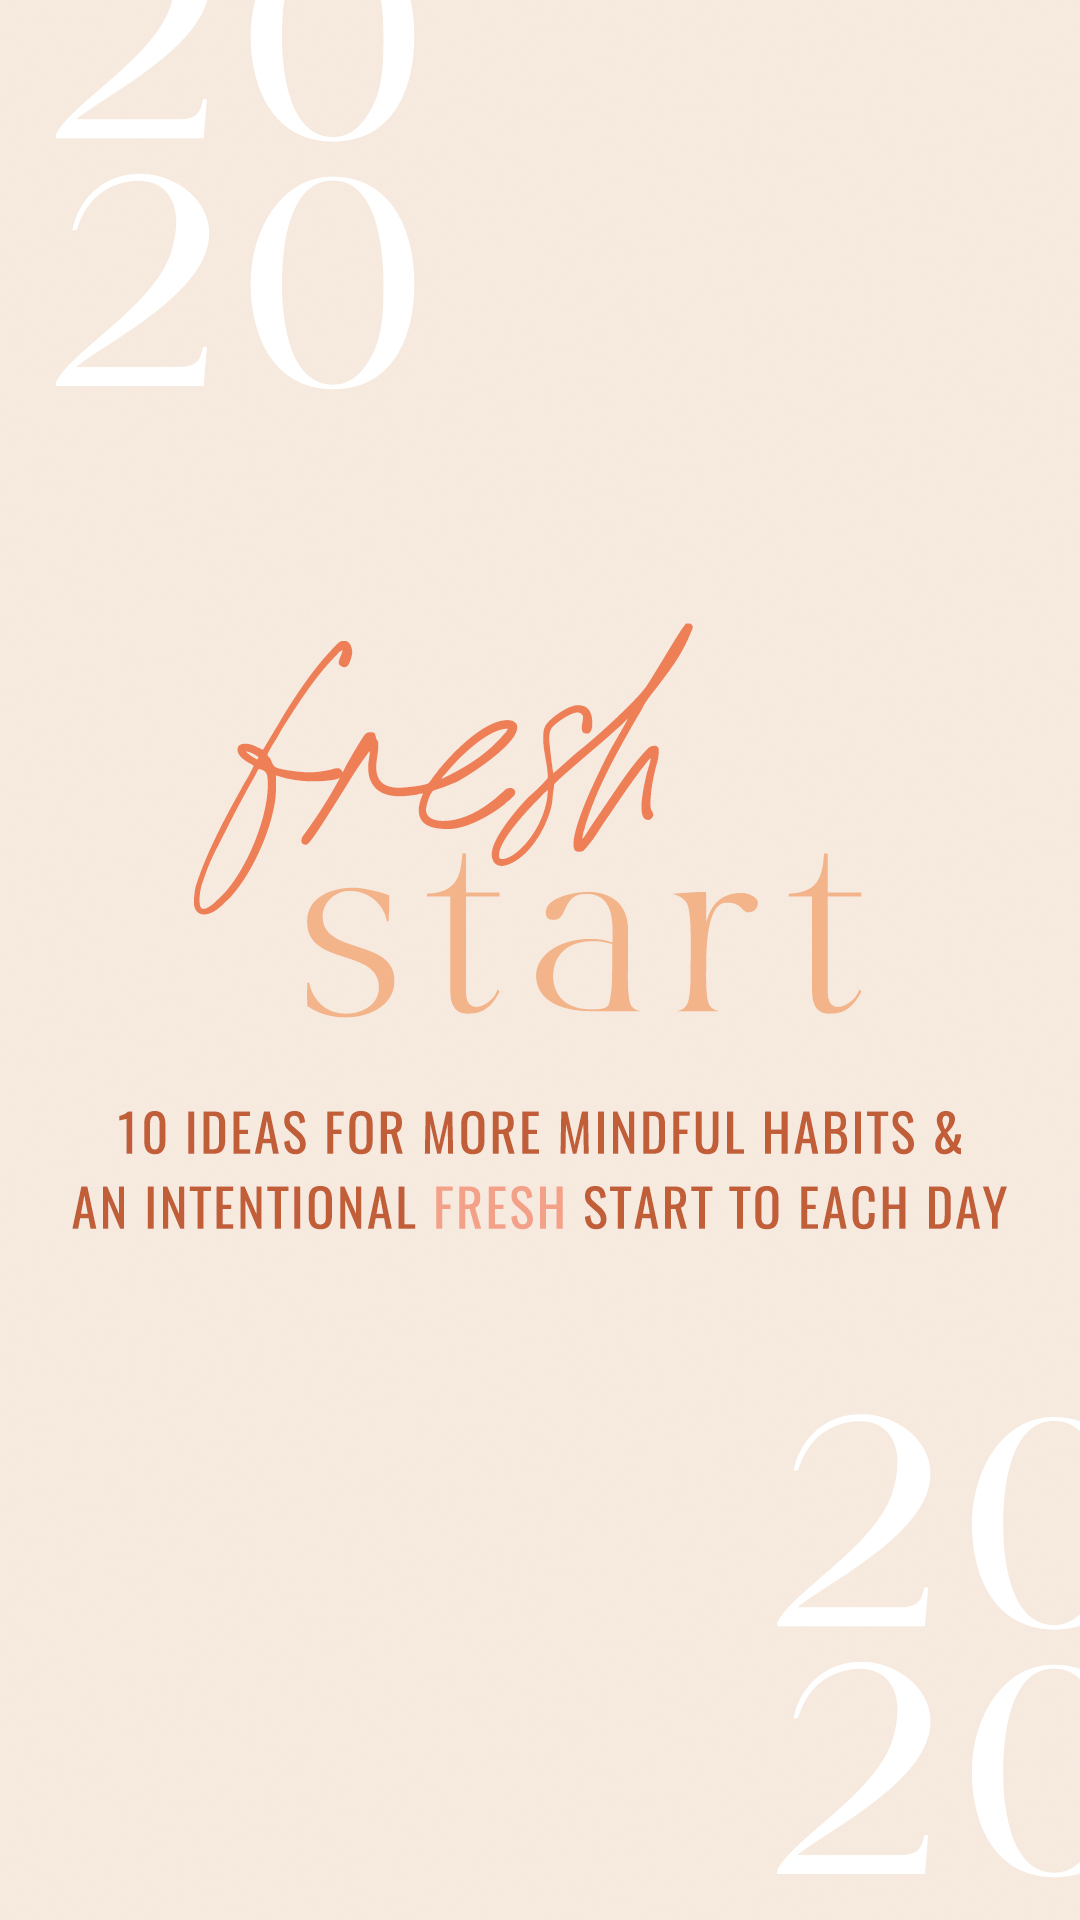 Healthy Habits & Intentional Living. 10 ideas for more mindful habits & an intentional fresh start to each day